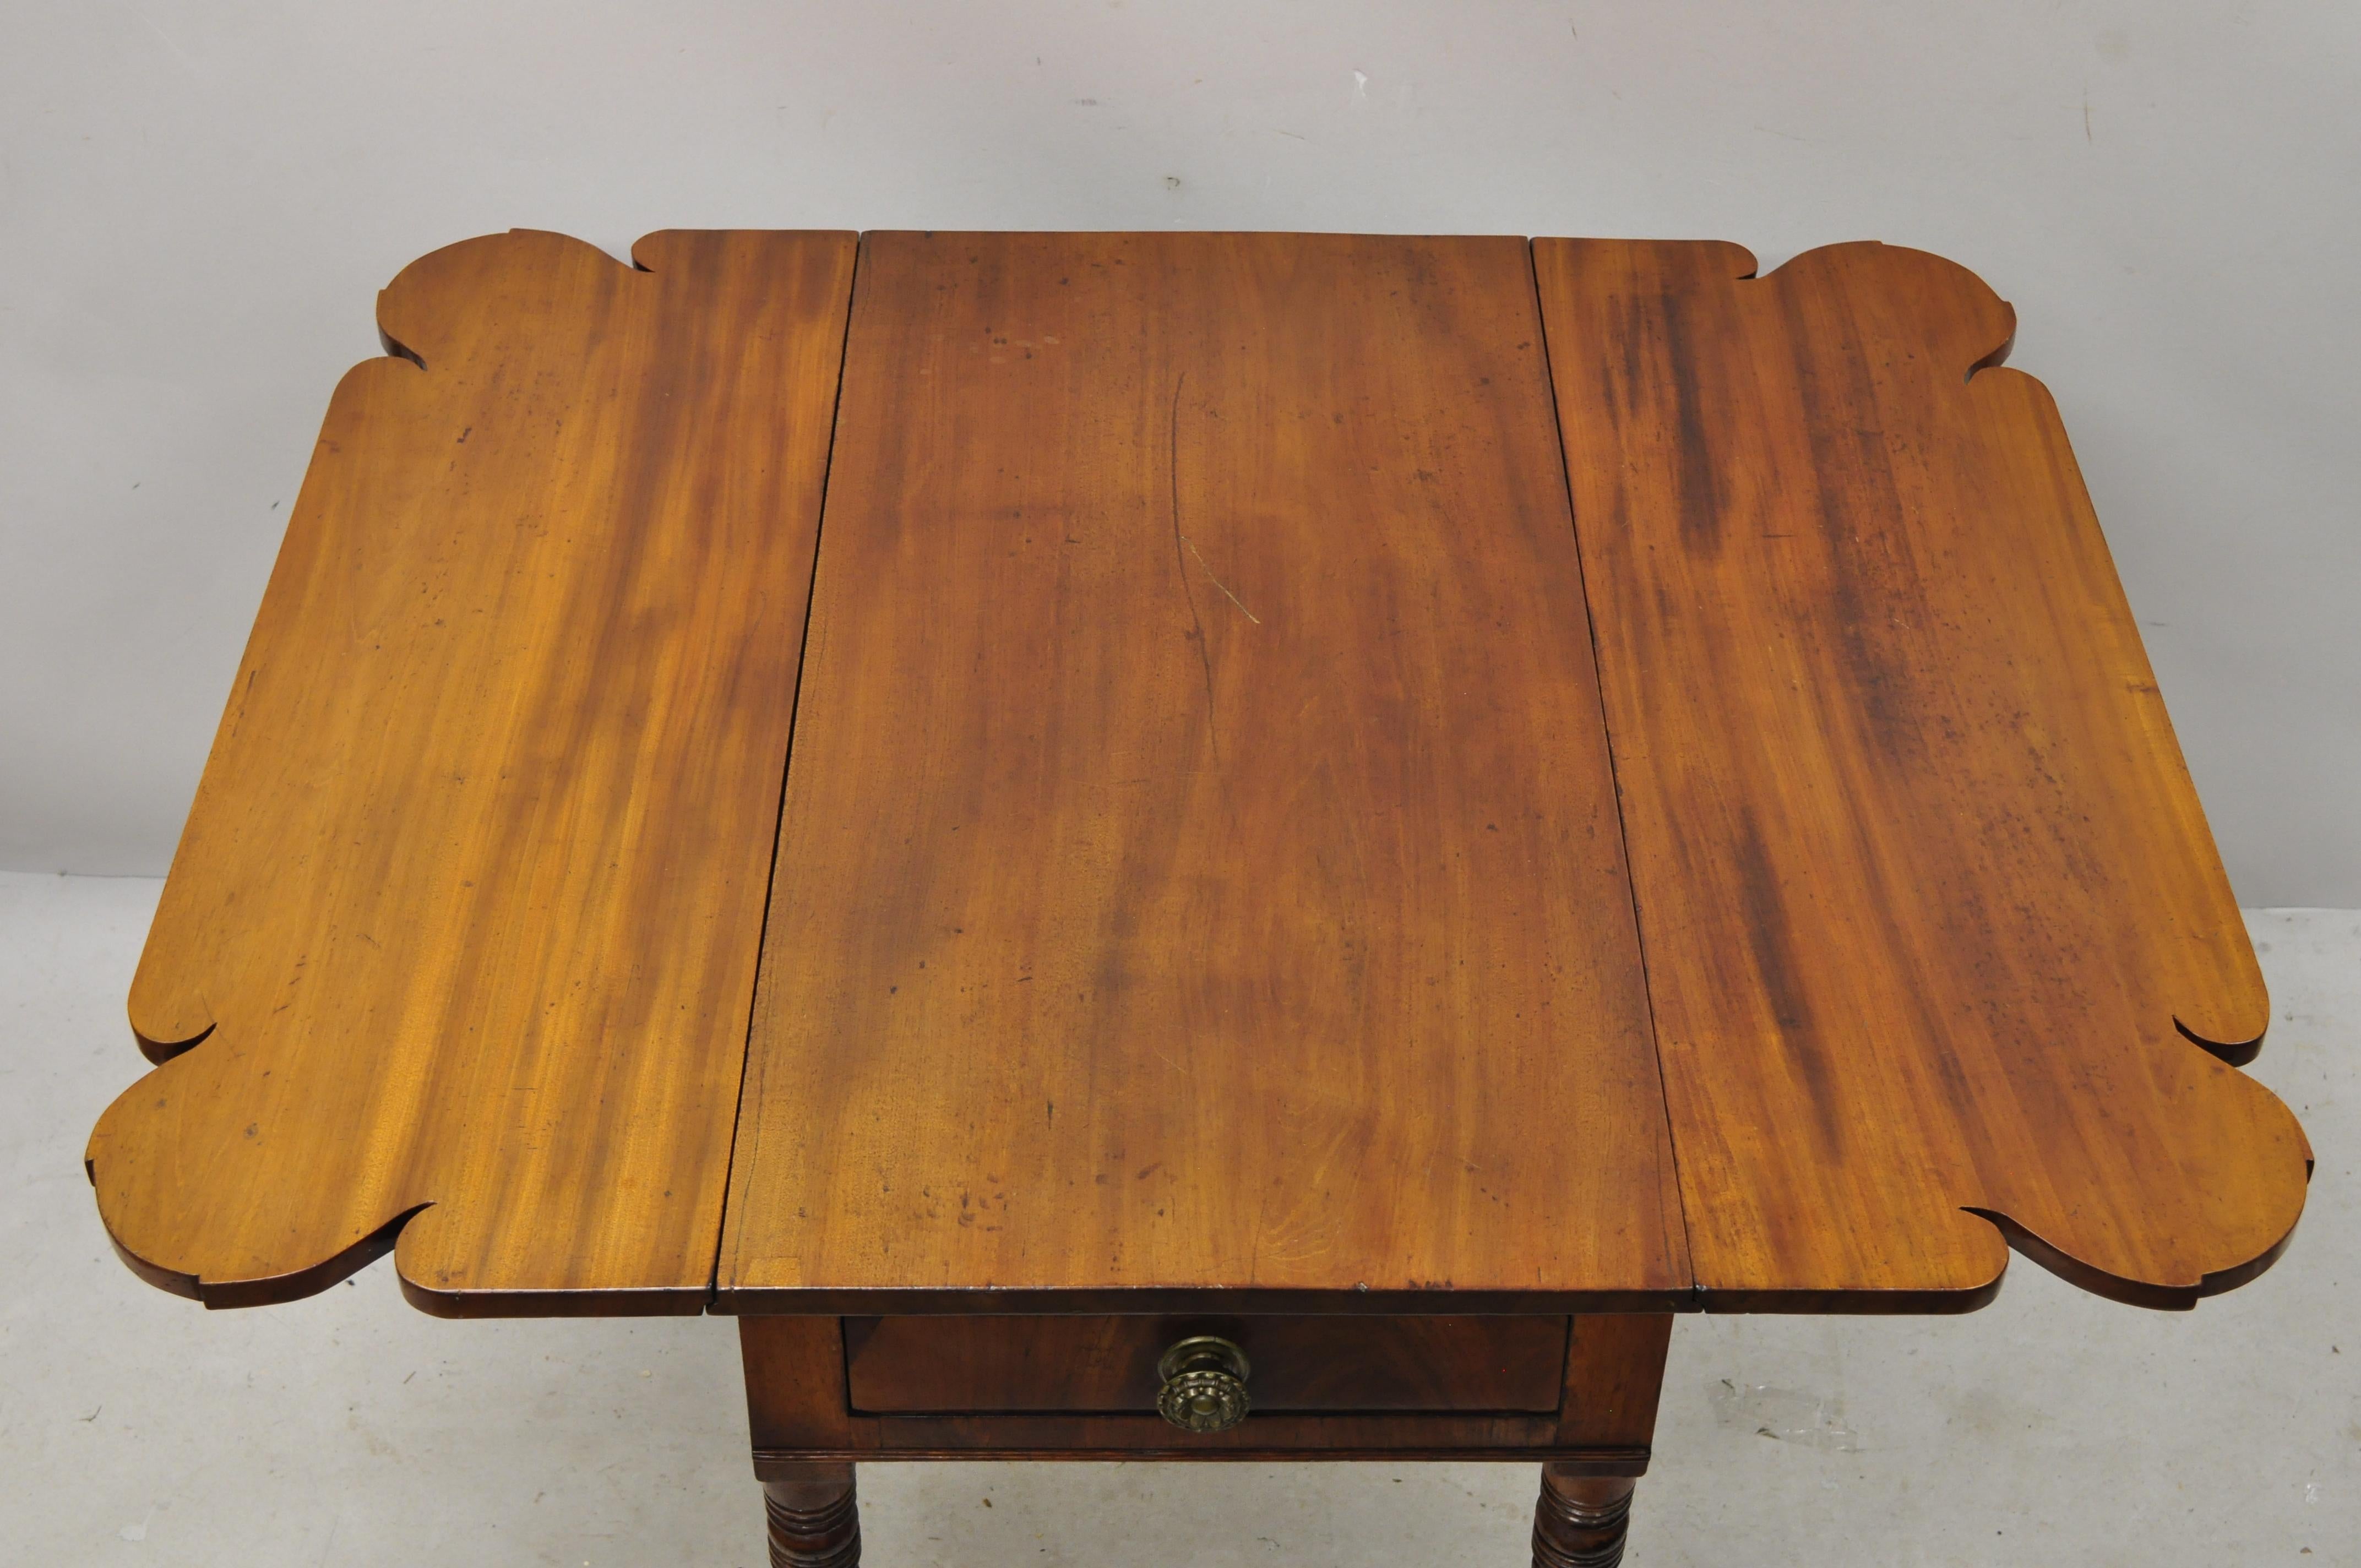 American Colonial 19th Century Scallop Carved Drop Leaf Mahogany Breakfast Dining Table 1-Drawer